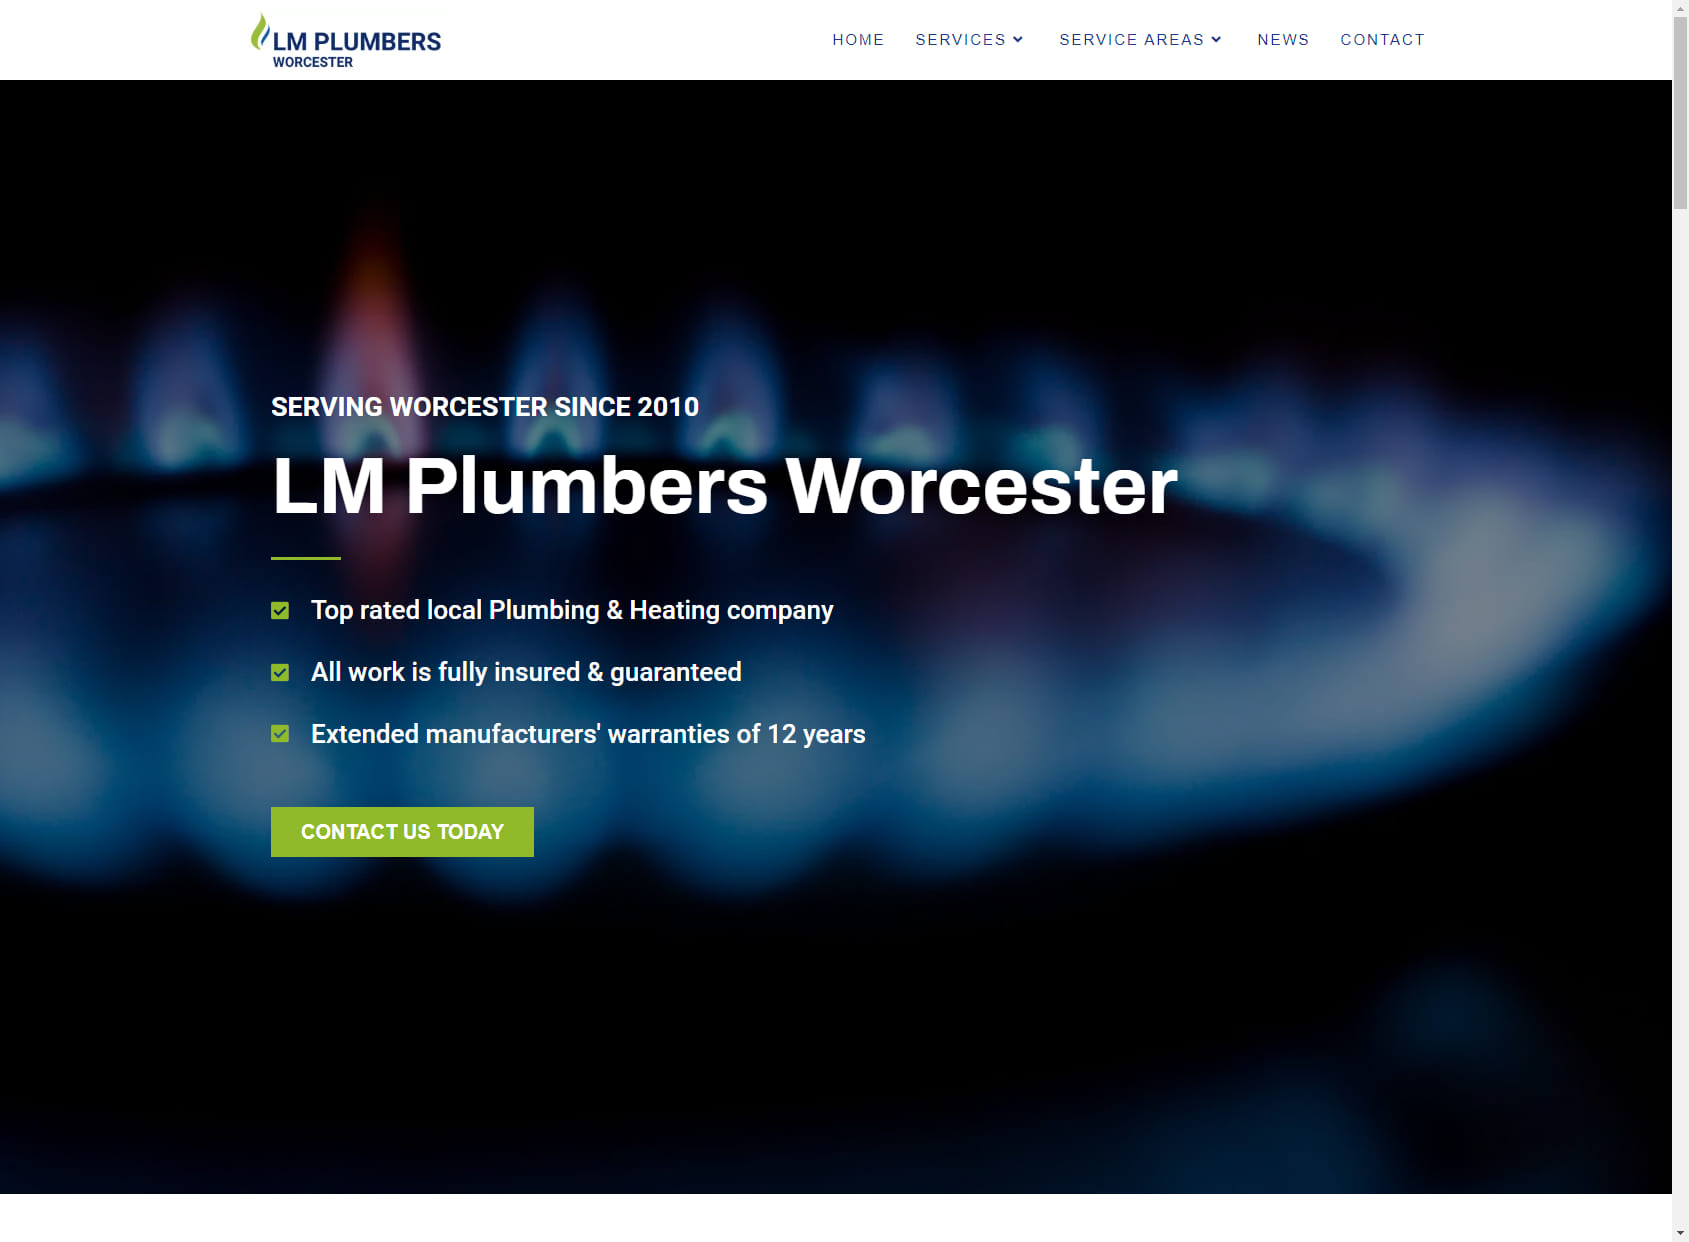 LM Plumbers Worcester